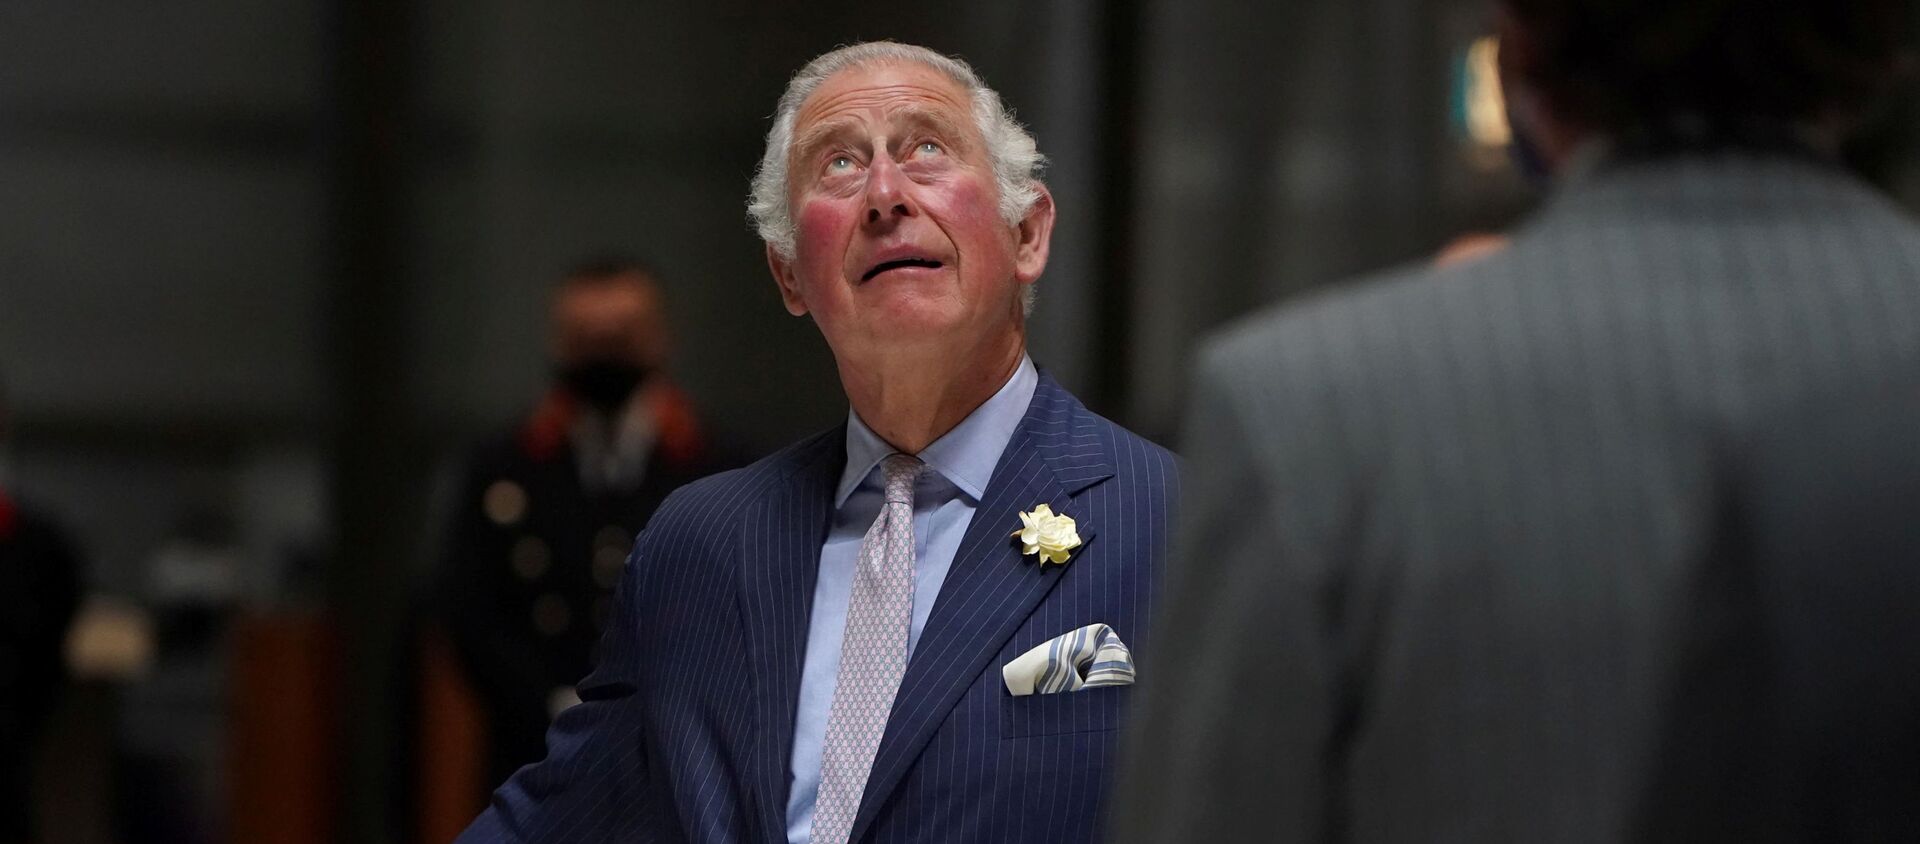 Britain's Prince Charles looks up during  his visit to the Lloyd's of London, an insurance and reinsurance marketplace, in London, Britain June 24, 2021 - Sputnik International, 1920, 04.07.2021